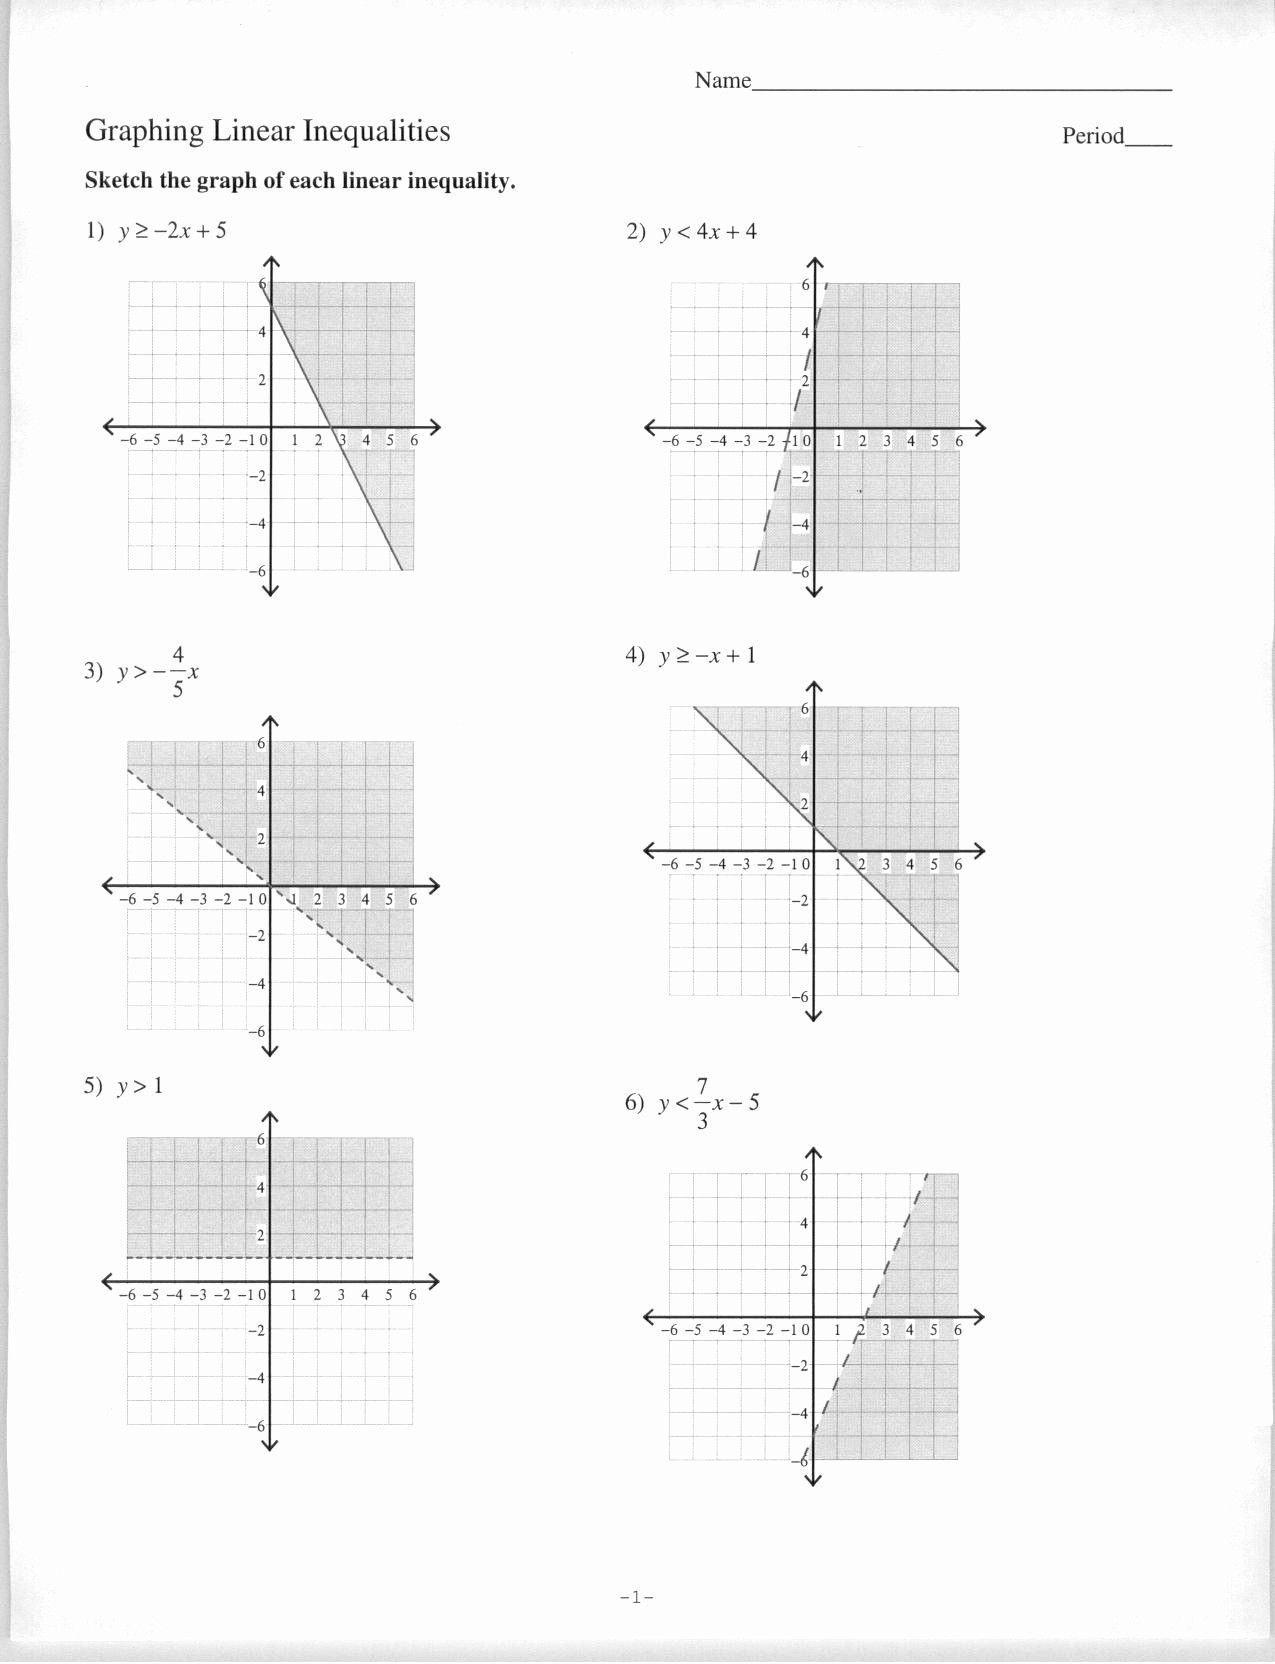 solving-systems-of-linear-equations-graphing-worksheet-graphing-systems-of-linear-equations